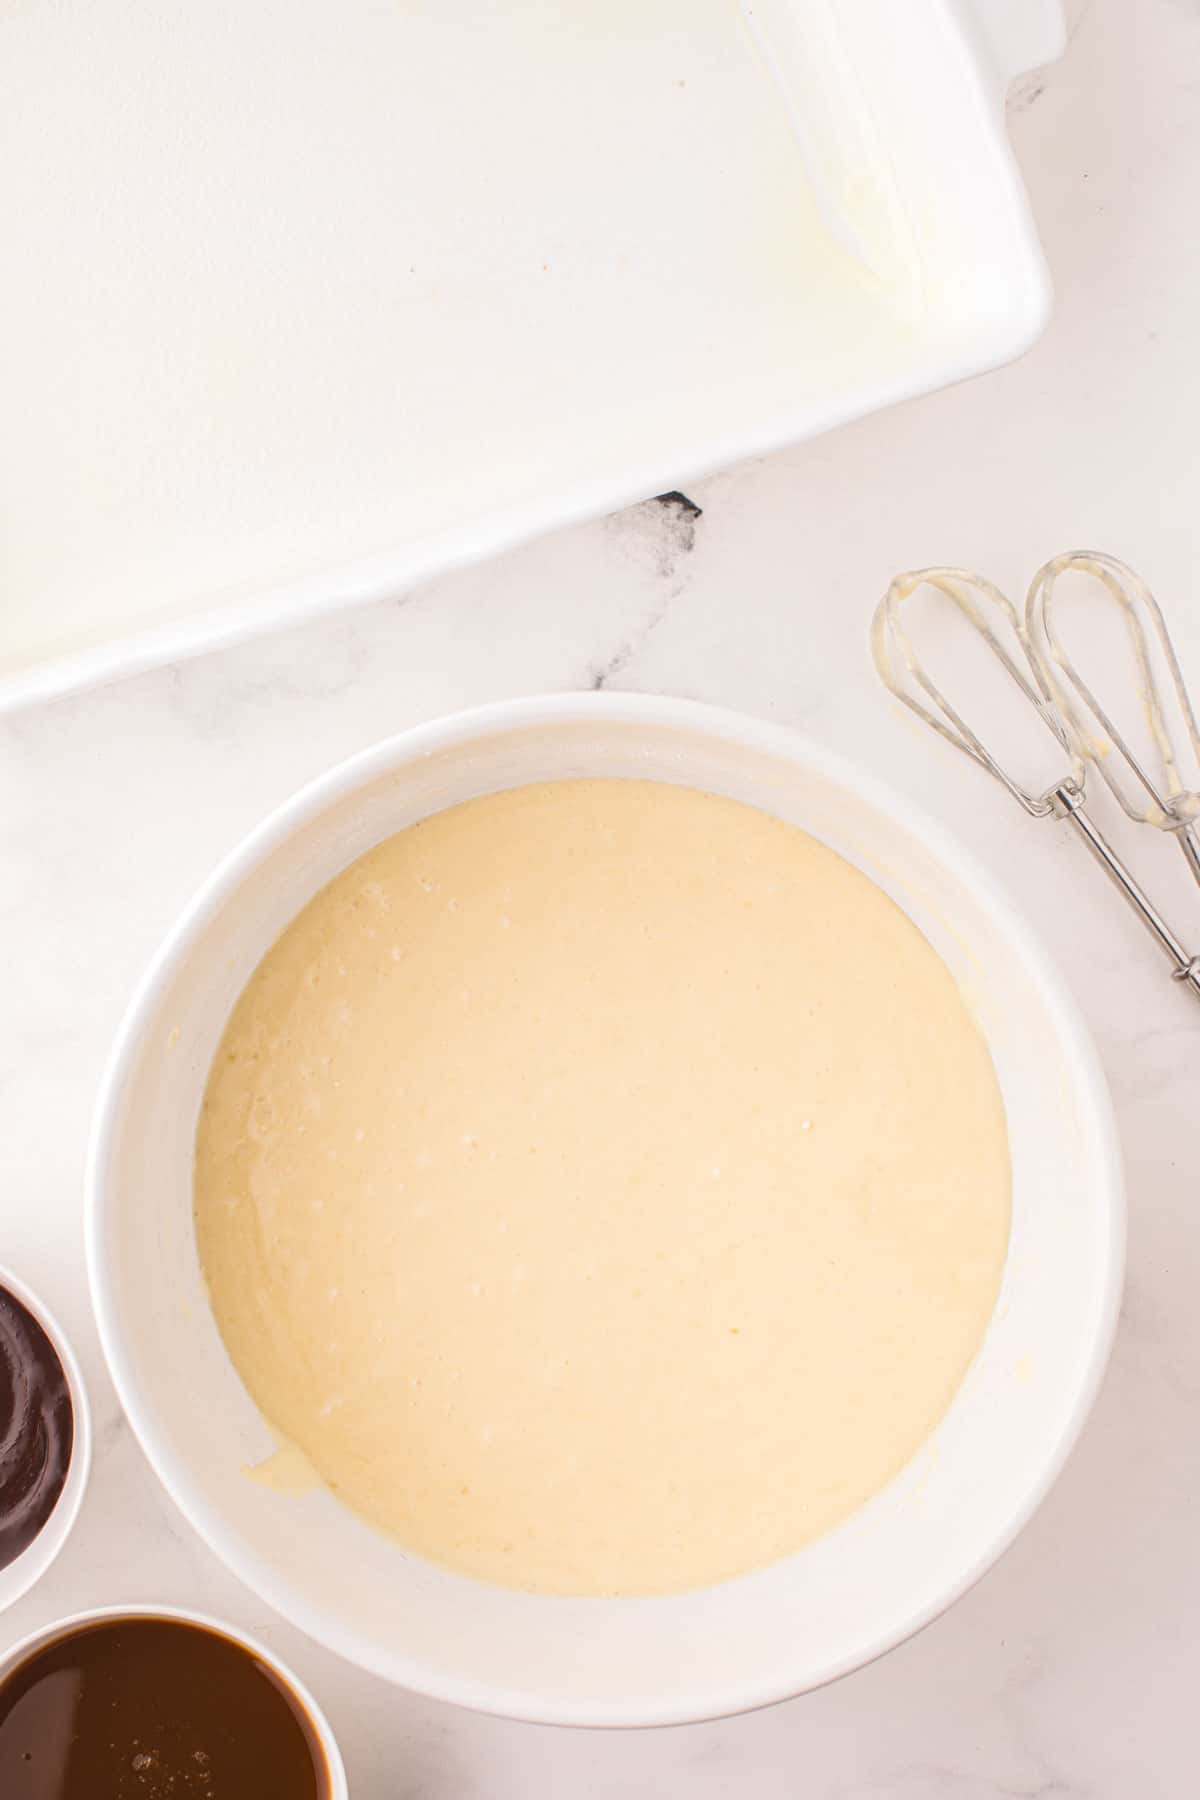 cake batter in a mixing bowl